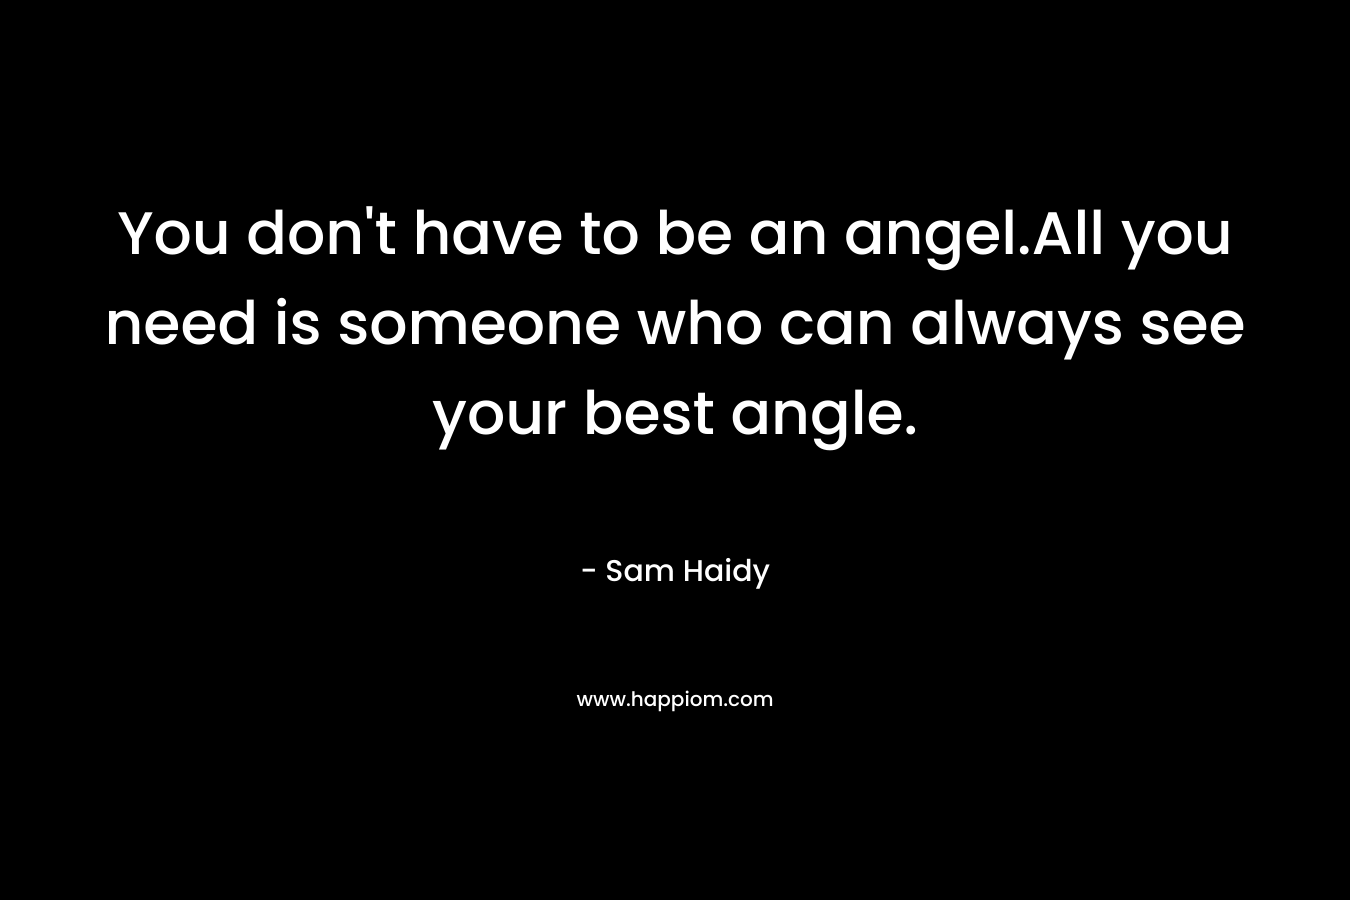 You don’t have to be an angel.All you need is someone who can always see your best angle. – Sam Haidy